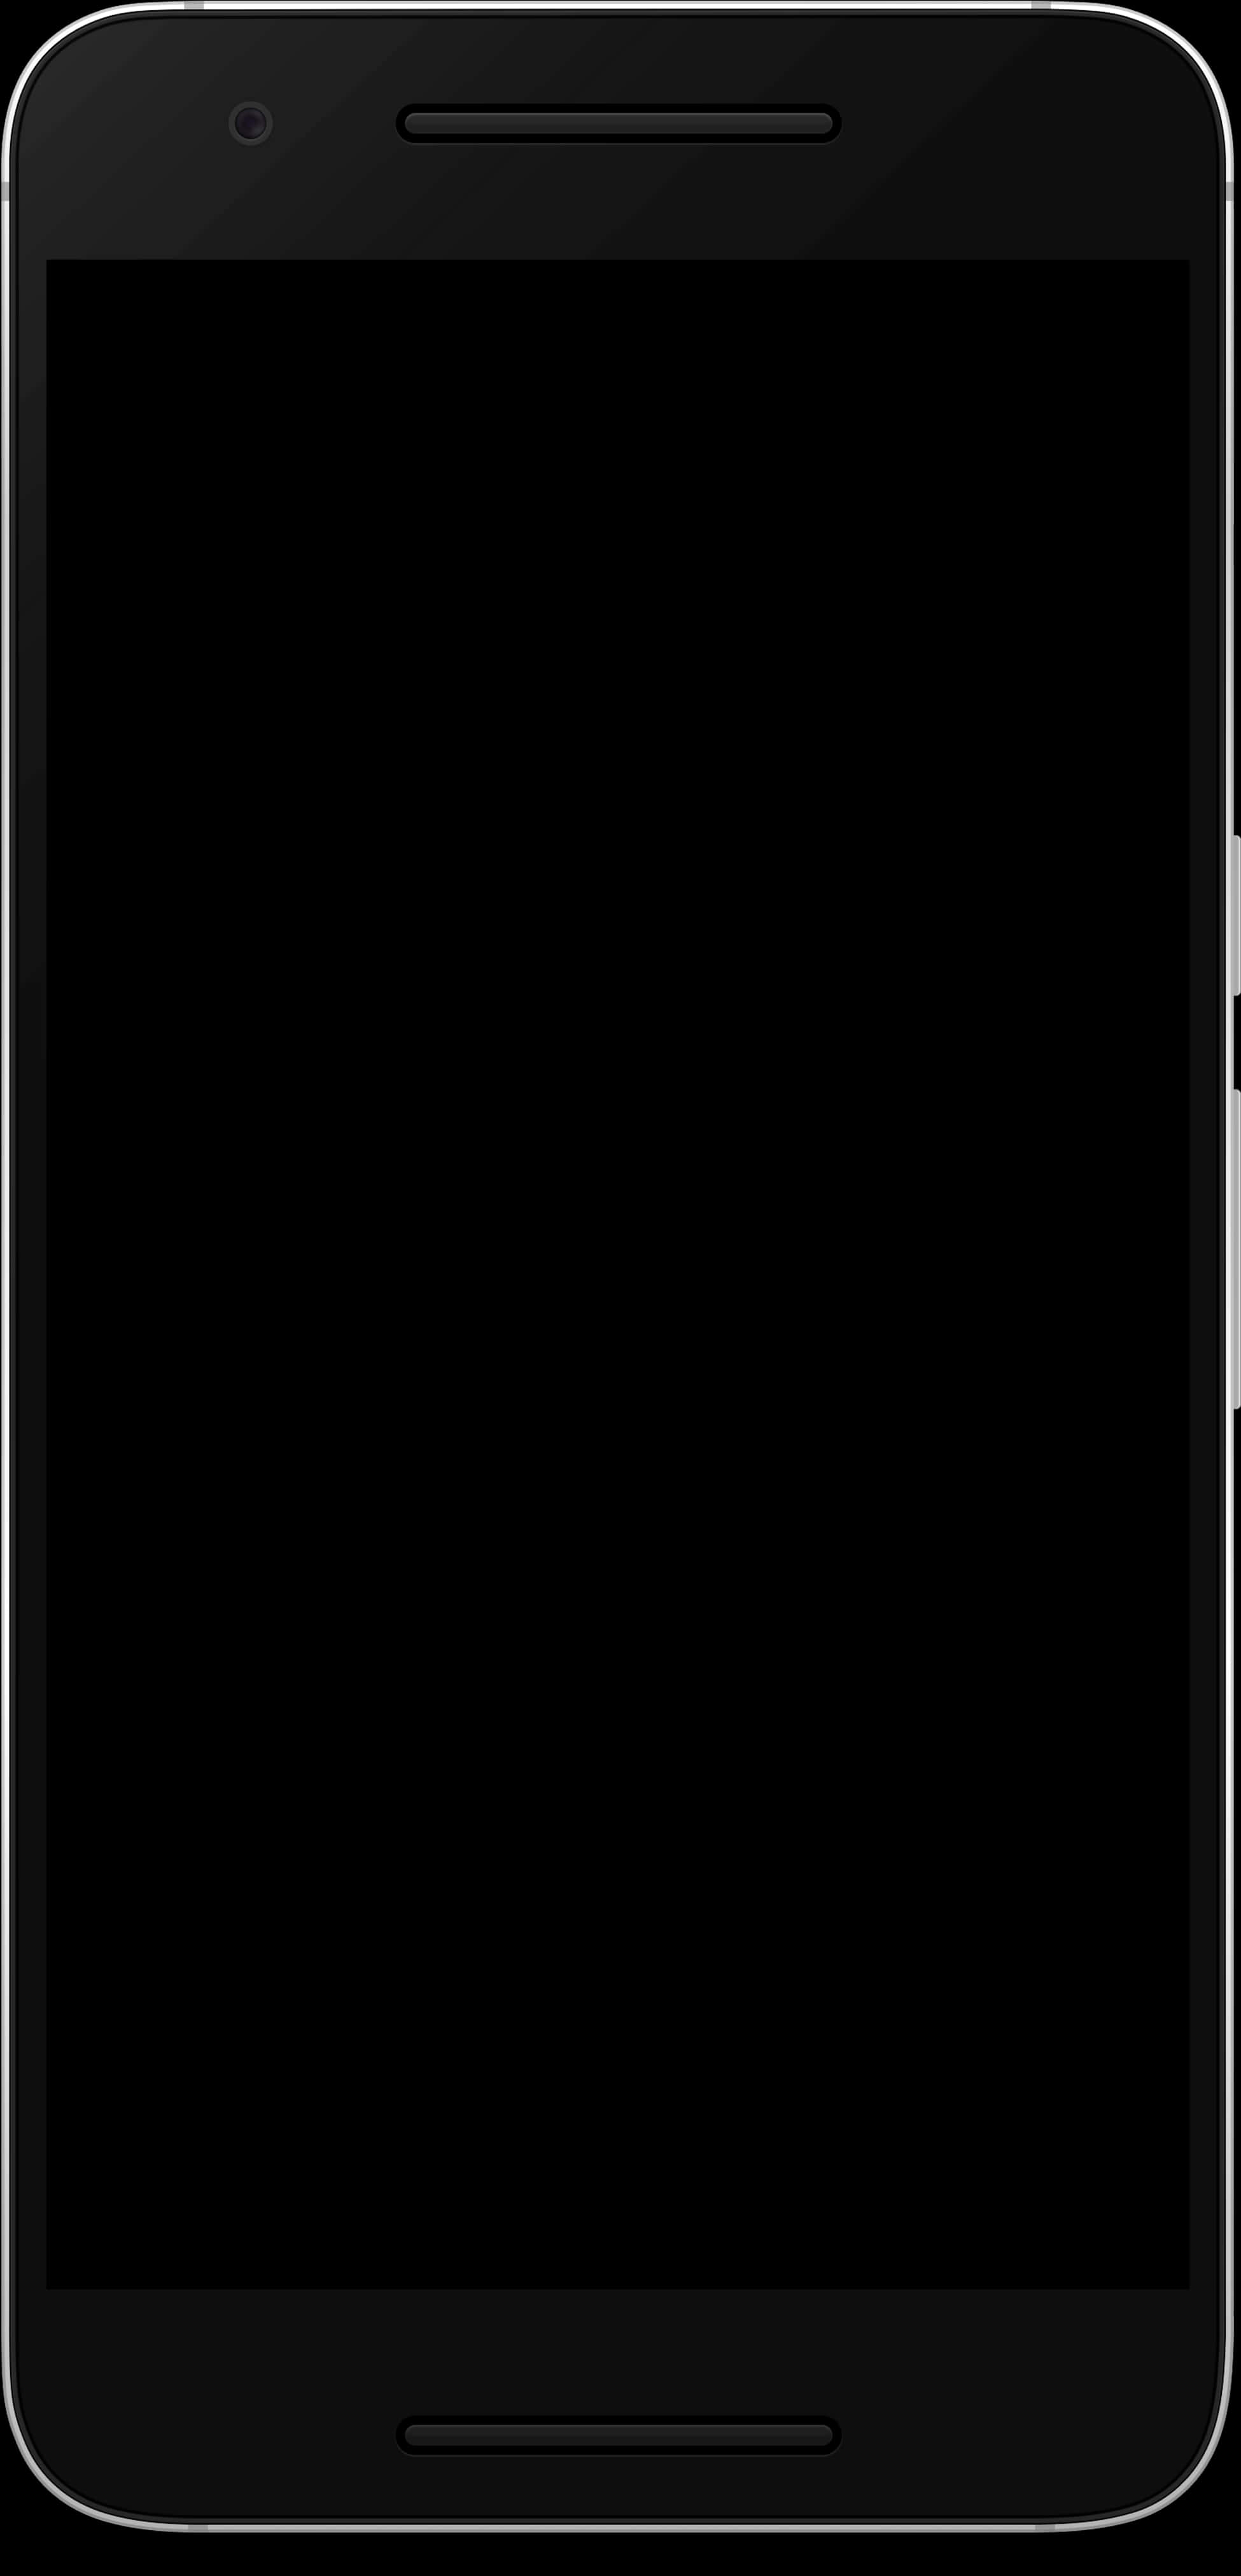 A Black And White Cell Phone